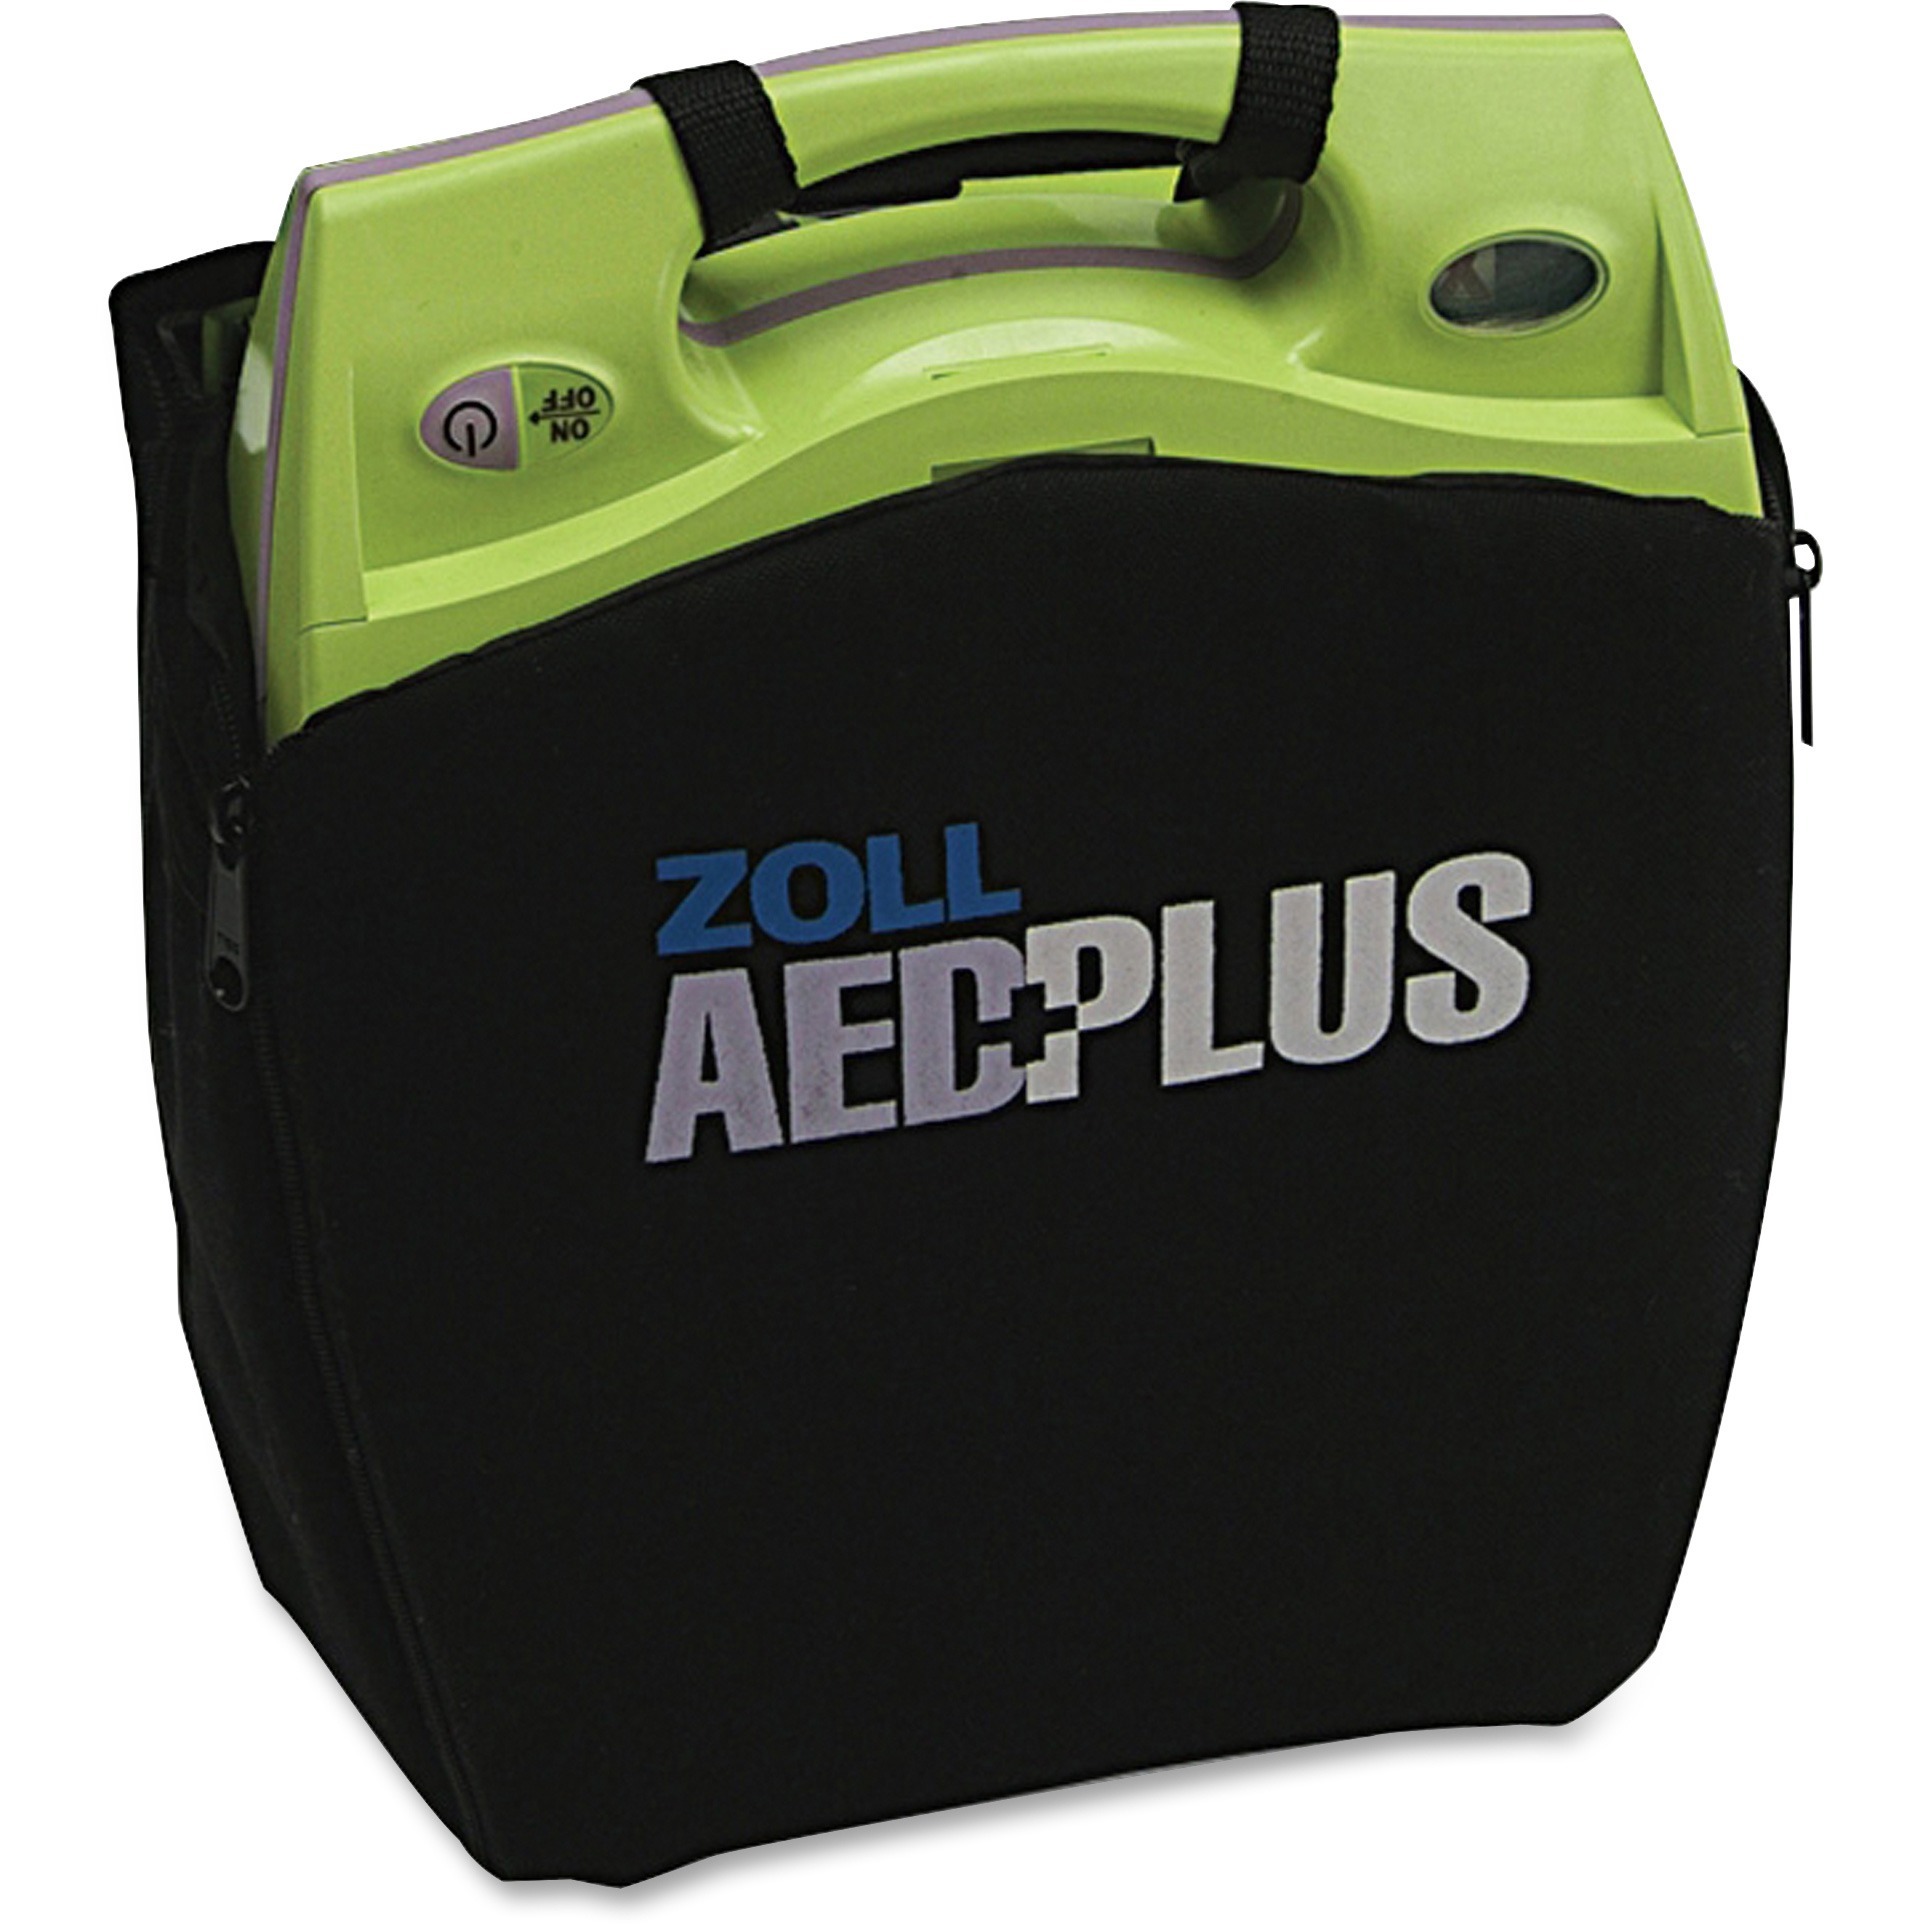 ZOLL ZOL8000080201 Medical AED Plus Soft Carrying Case 1 Black 